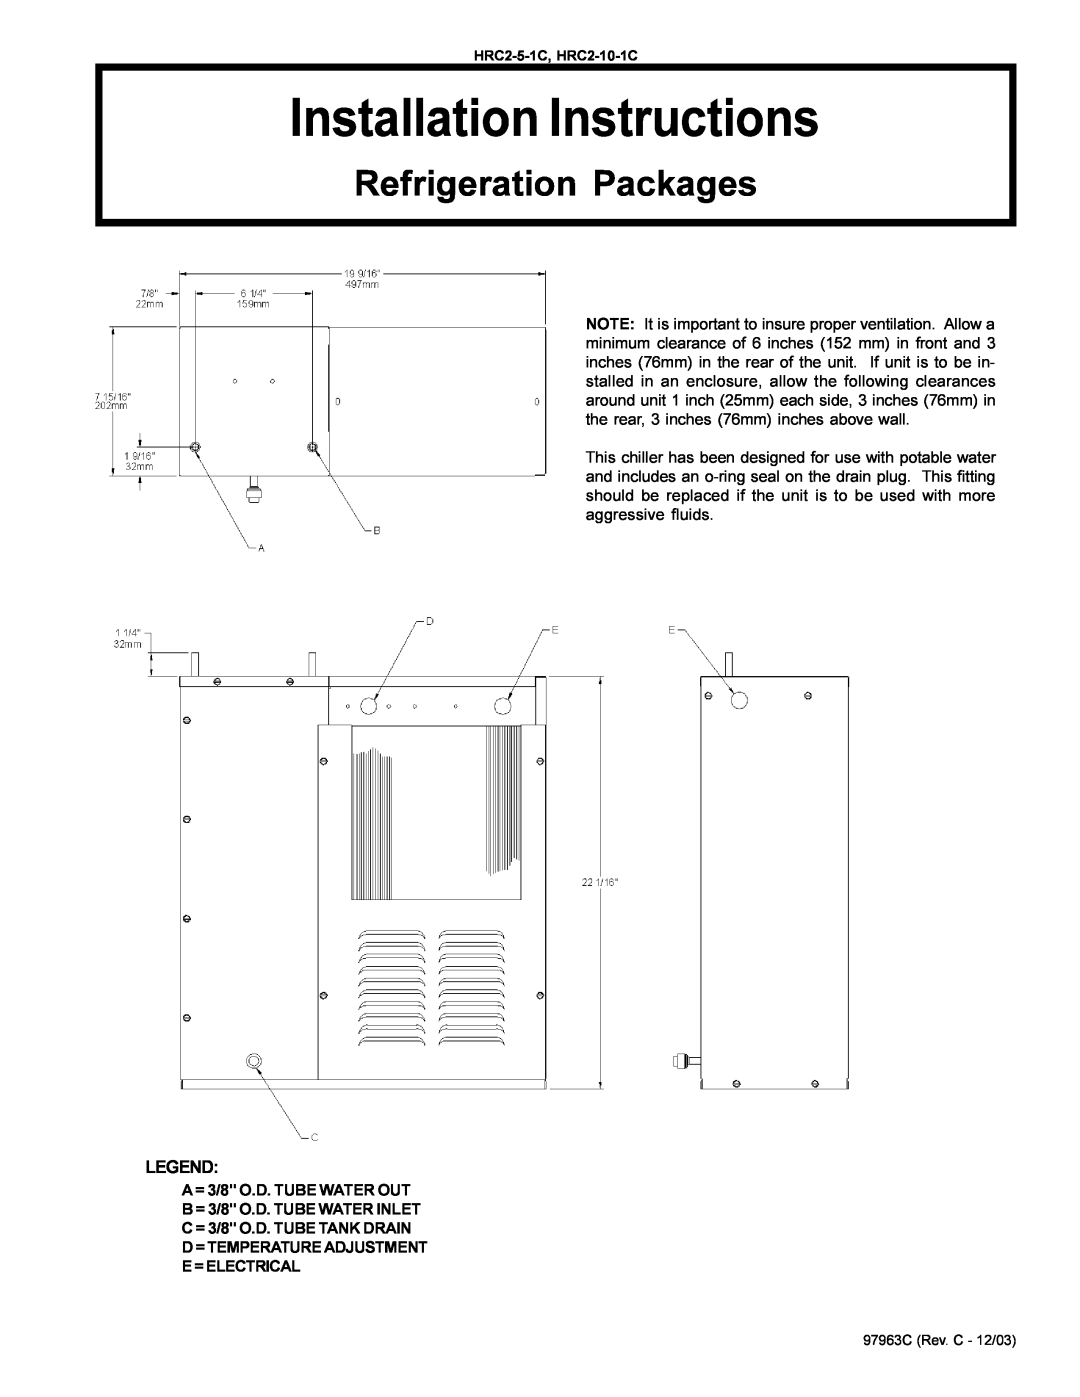 Elkay HRC2-5-1C installation instructions Installation Instructions, Refrigeration Packages, A = 3/8 O.D. TUBE WATER OUT 